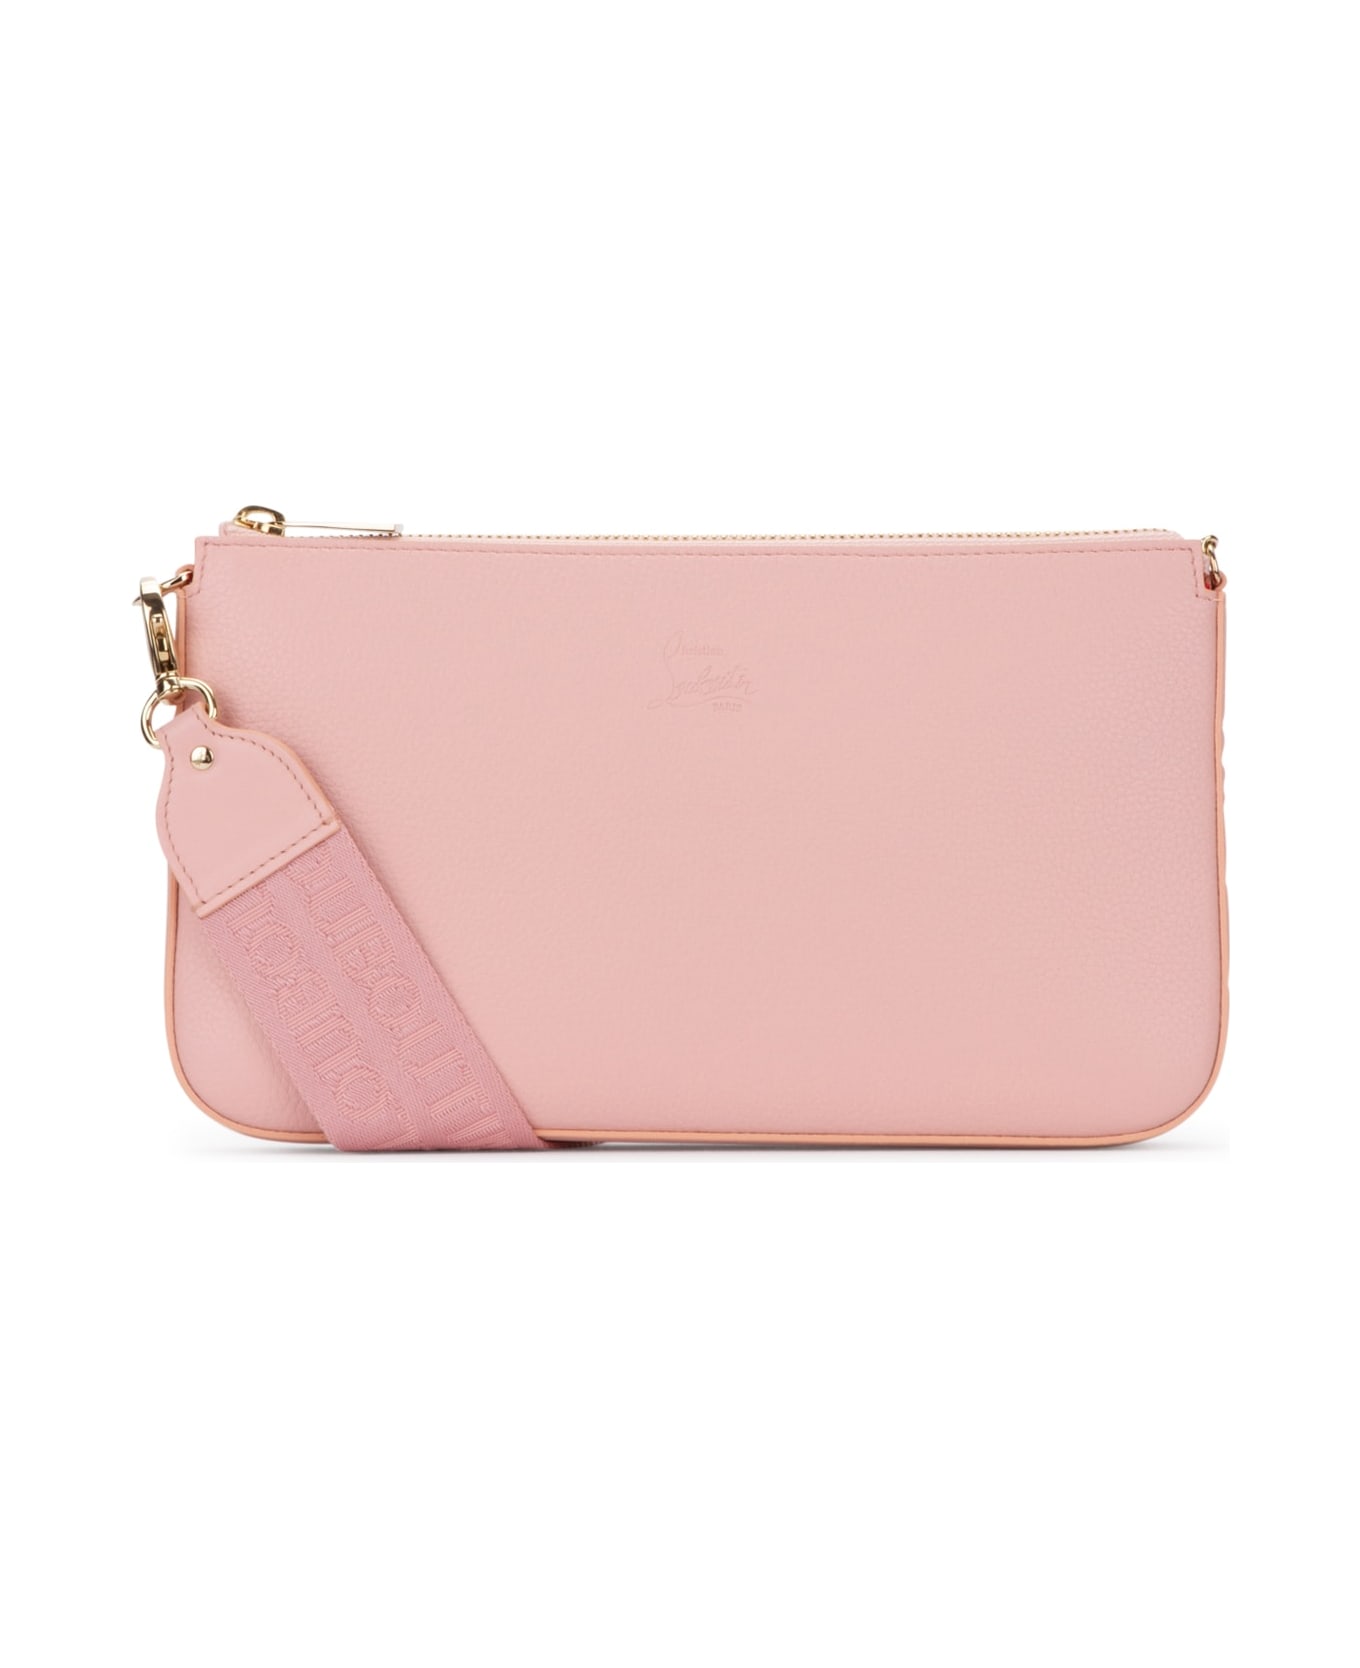 Christian Louboutin Pouch - P712 クラッチバッグ